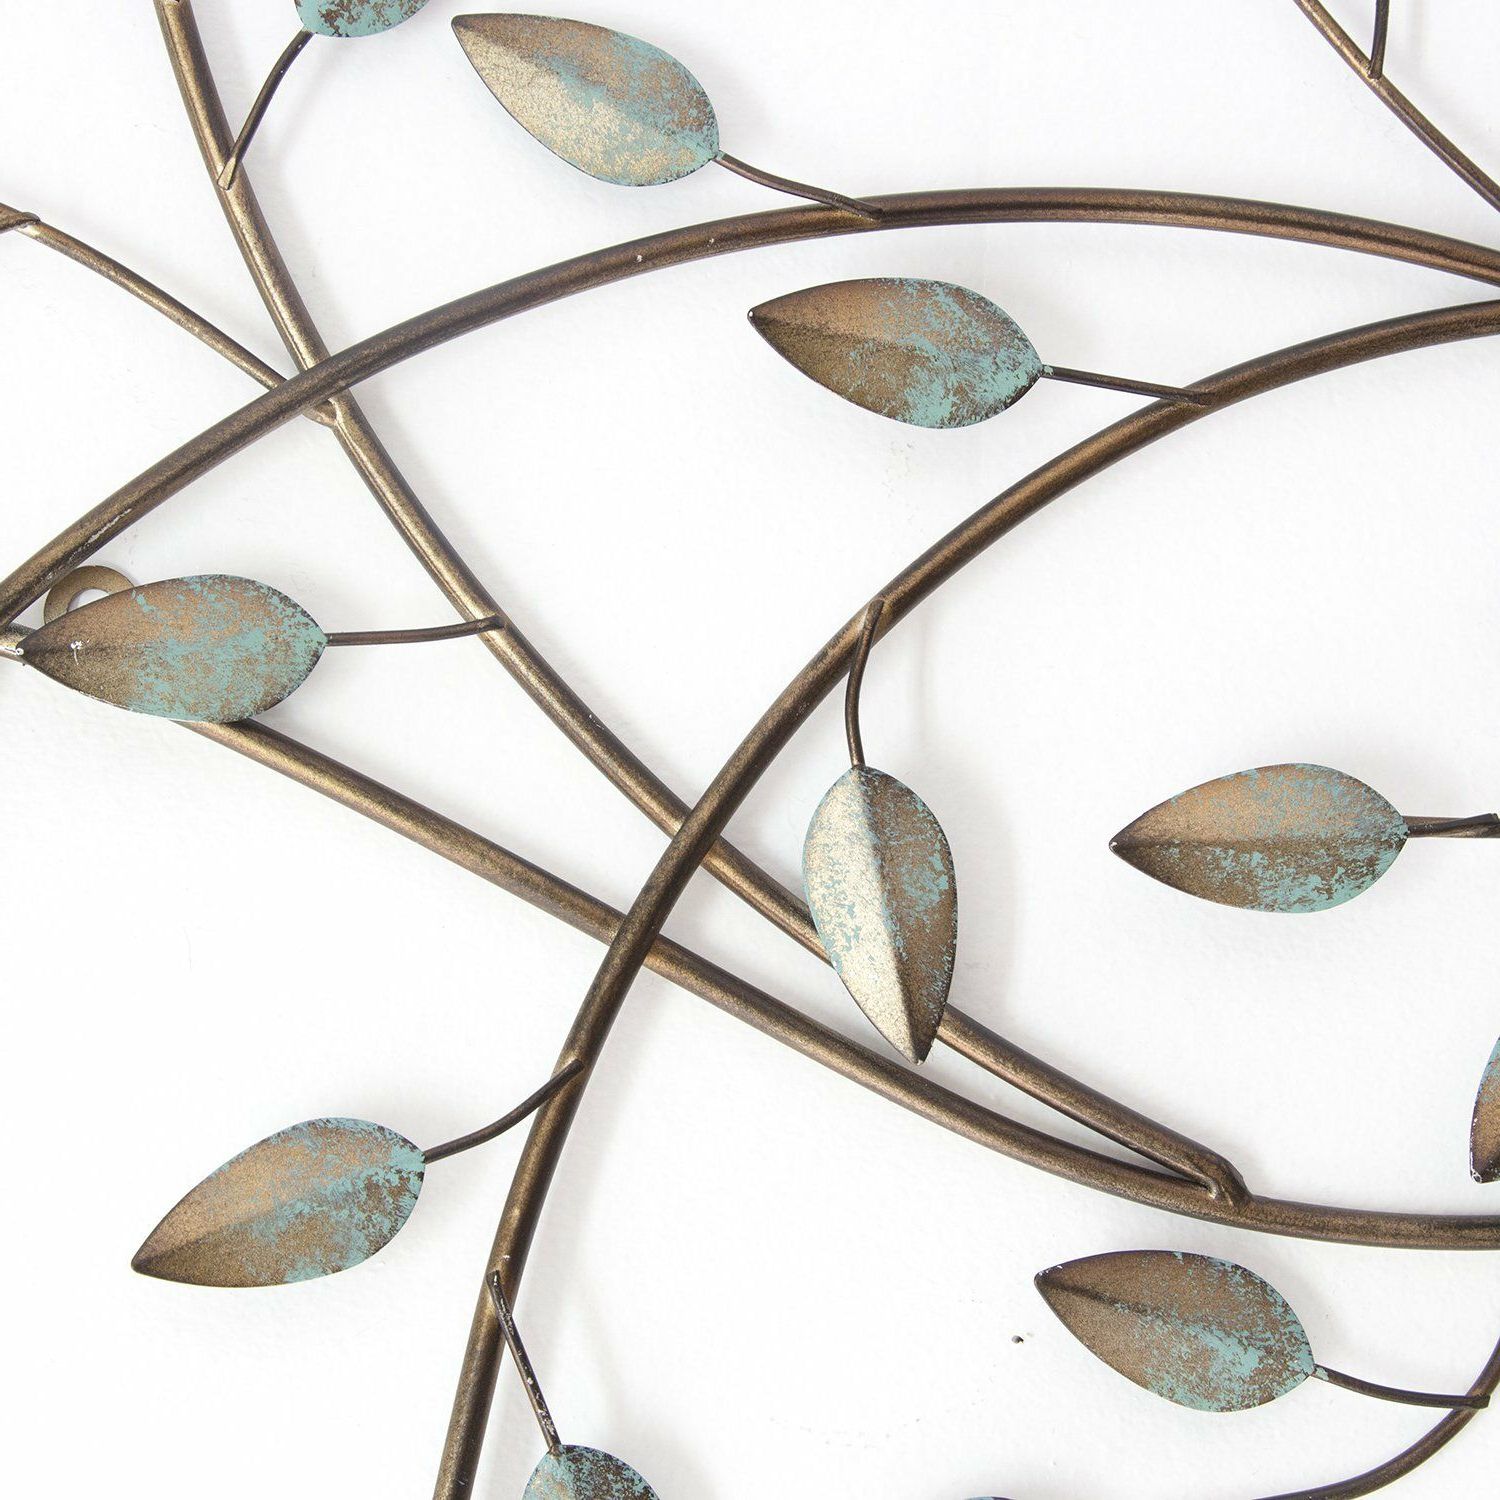 Gold And Teal Metal Leaves Hanging Interior Wall Art Home Decor (View 11 of 15)